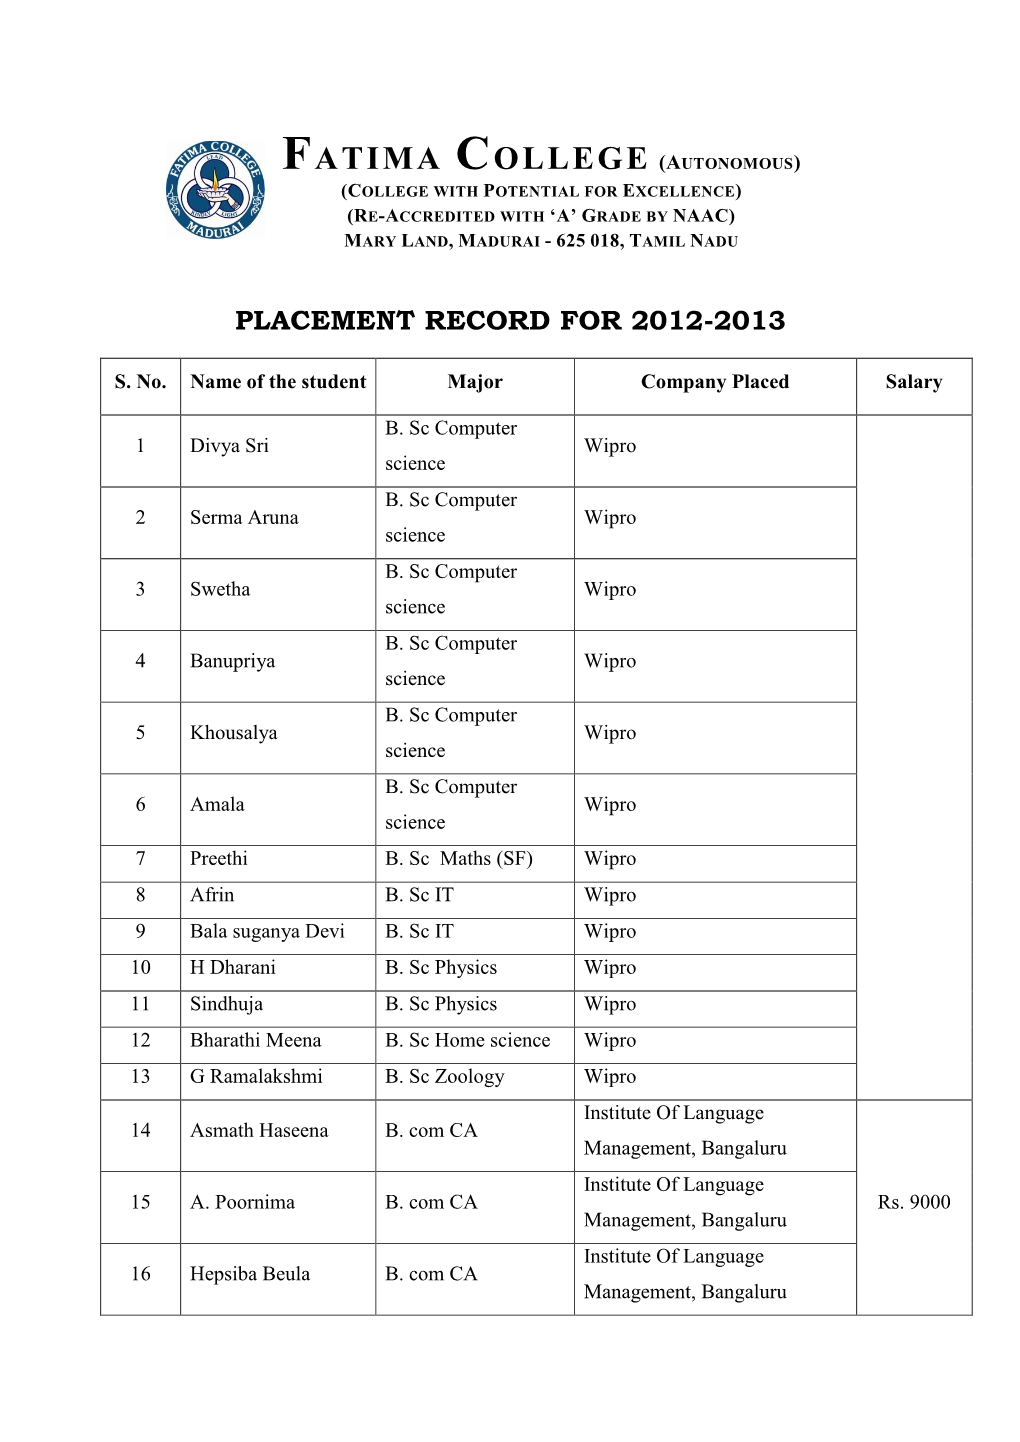 Placement Record for 2012-2013